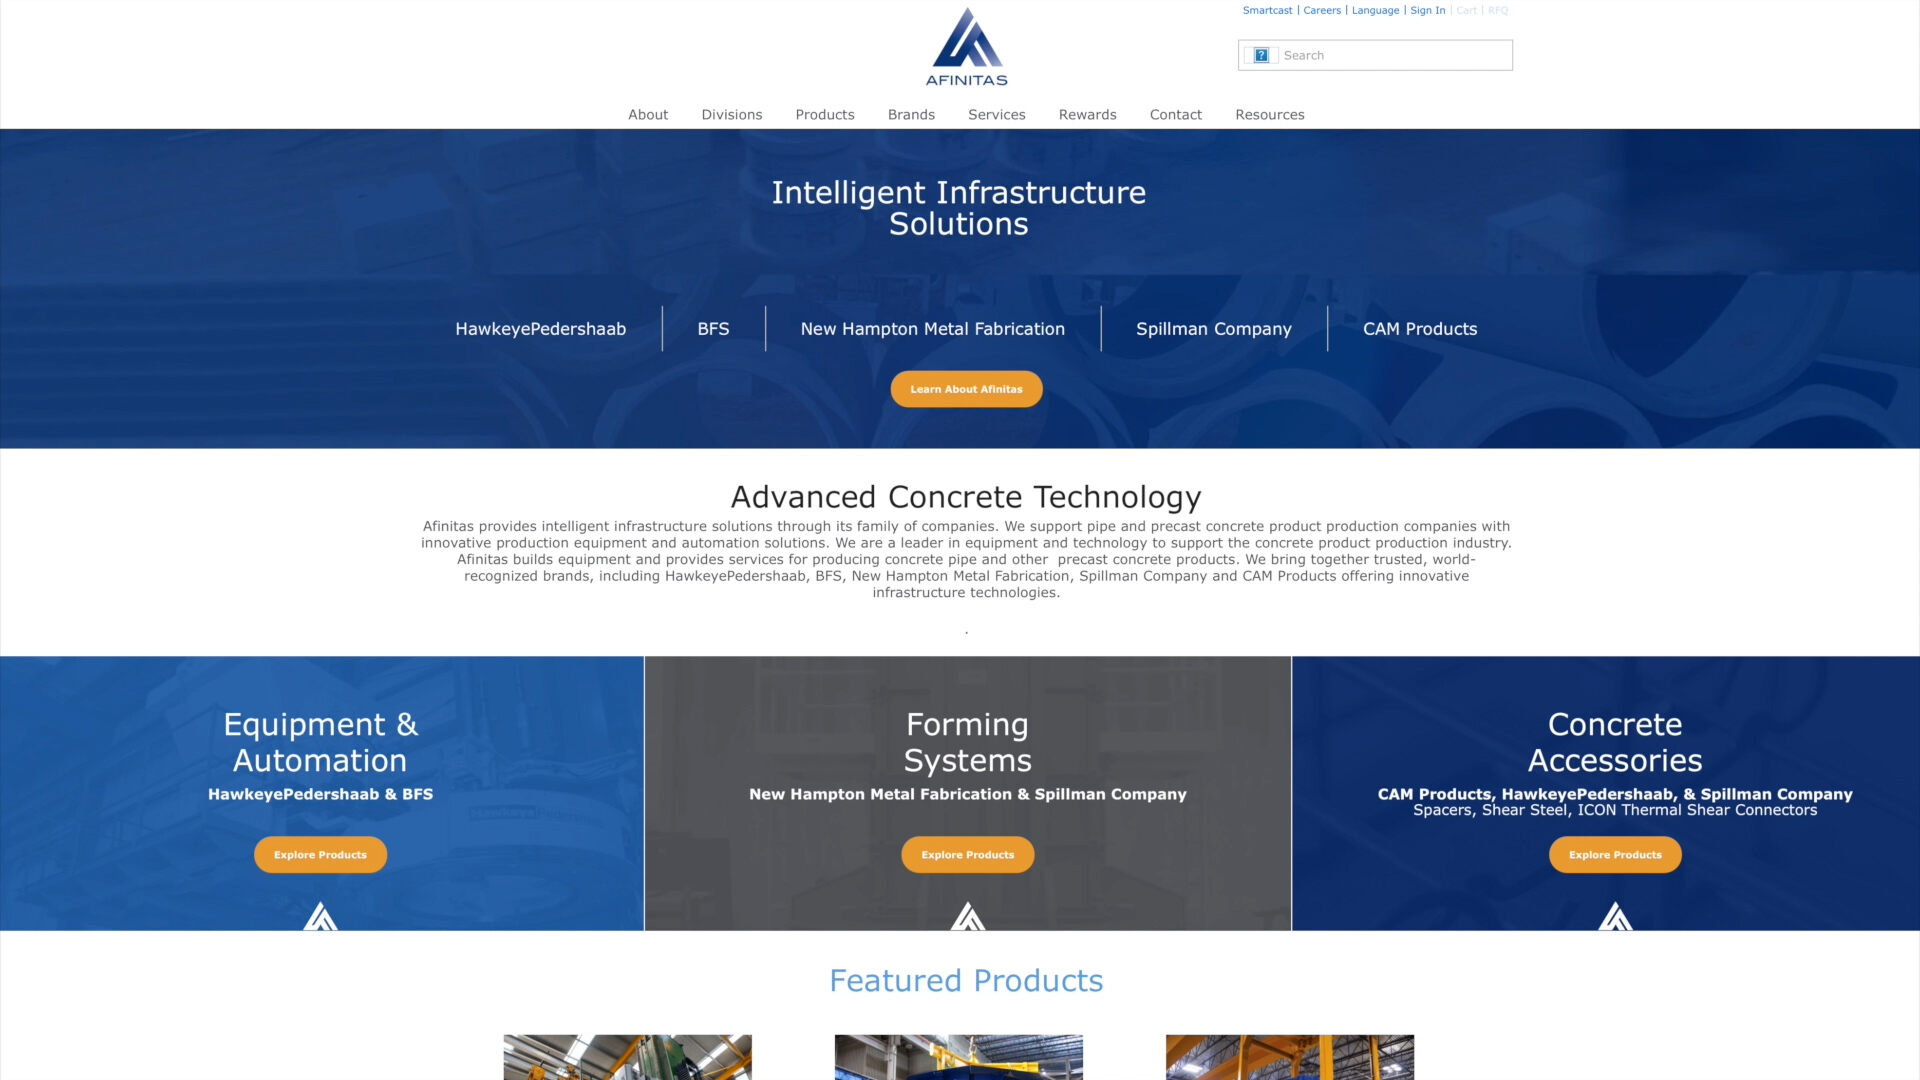 Afinitas Aligns into Three Business Units and Launches New Website